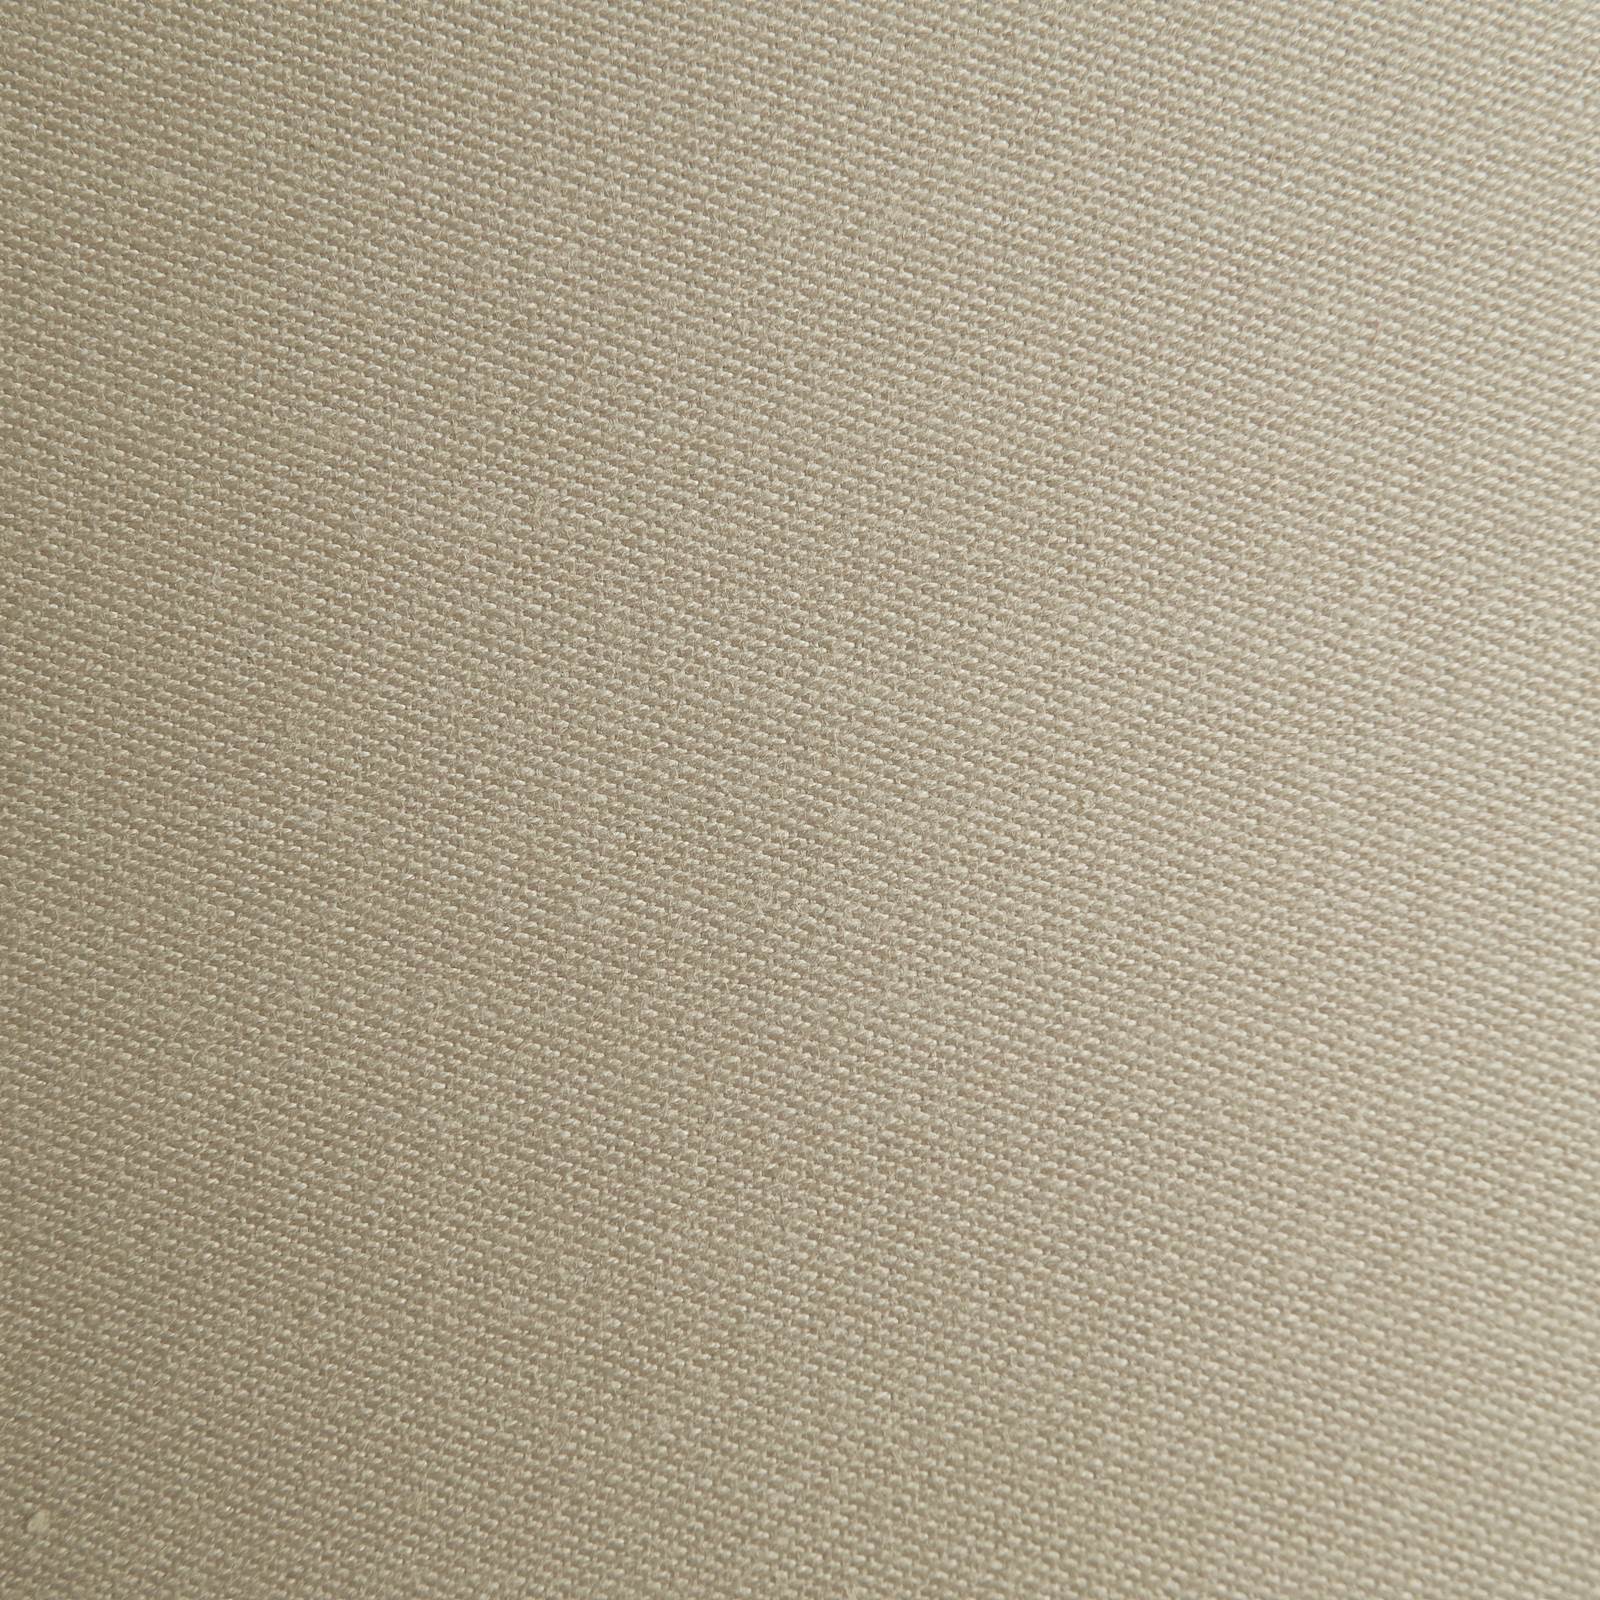 Vera - two-ply damask fabric - Indanthren® coloration (stone)